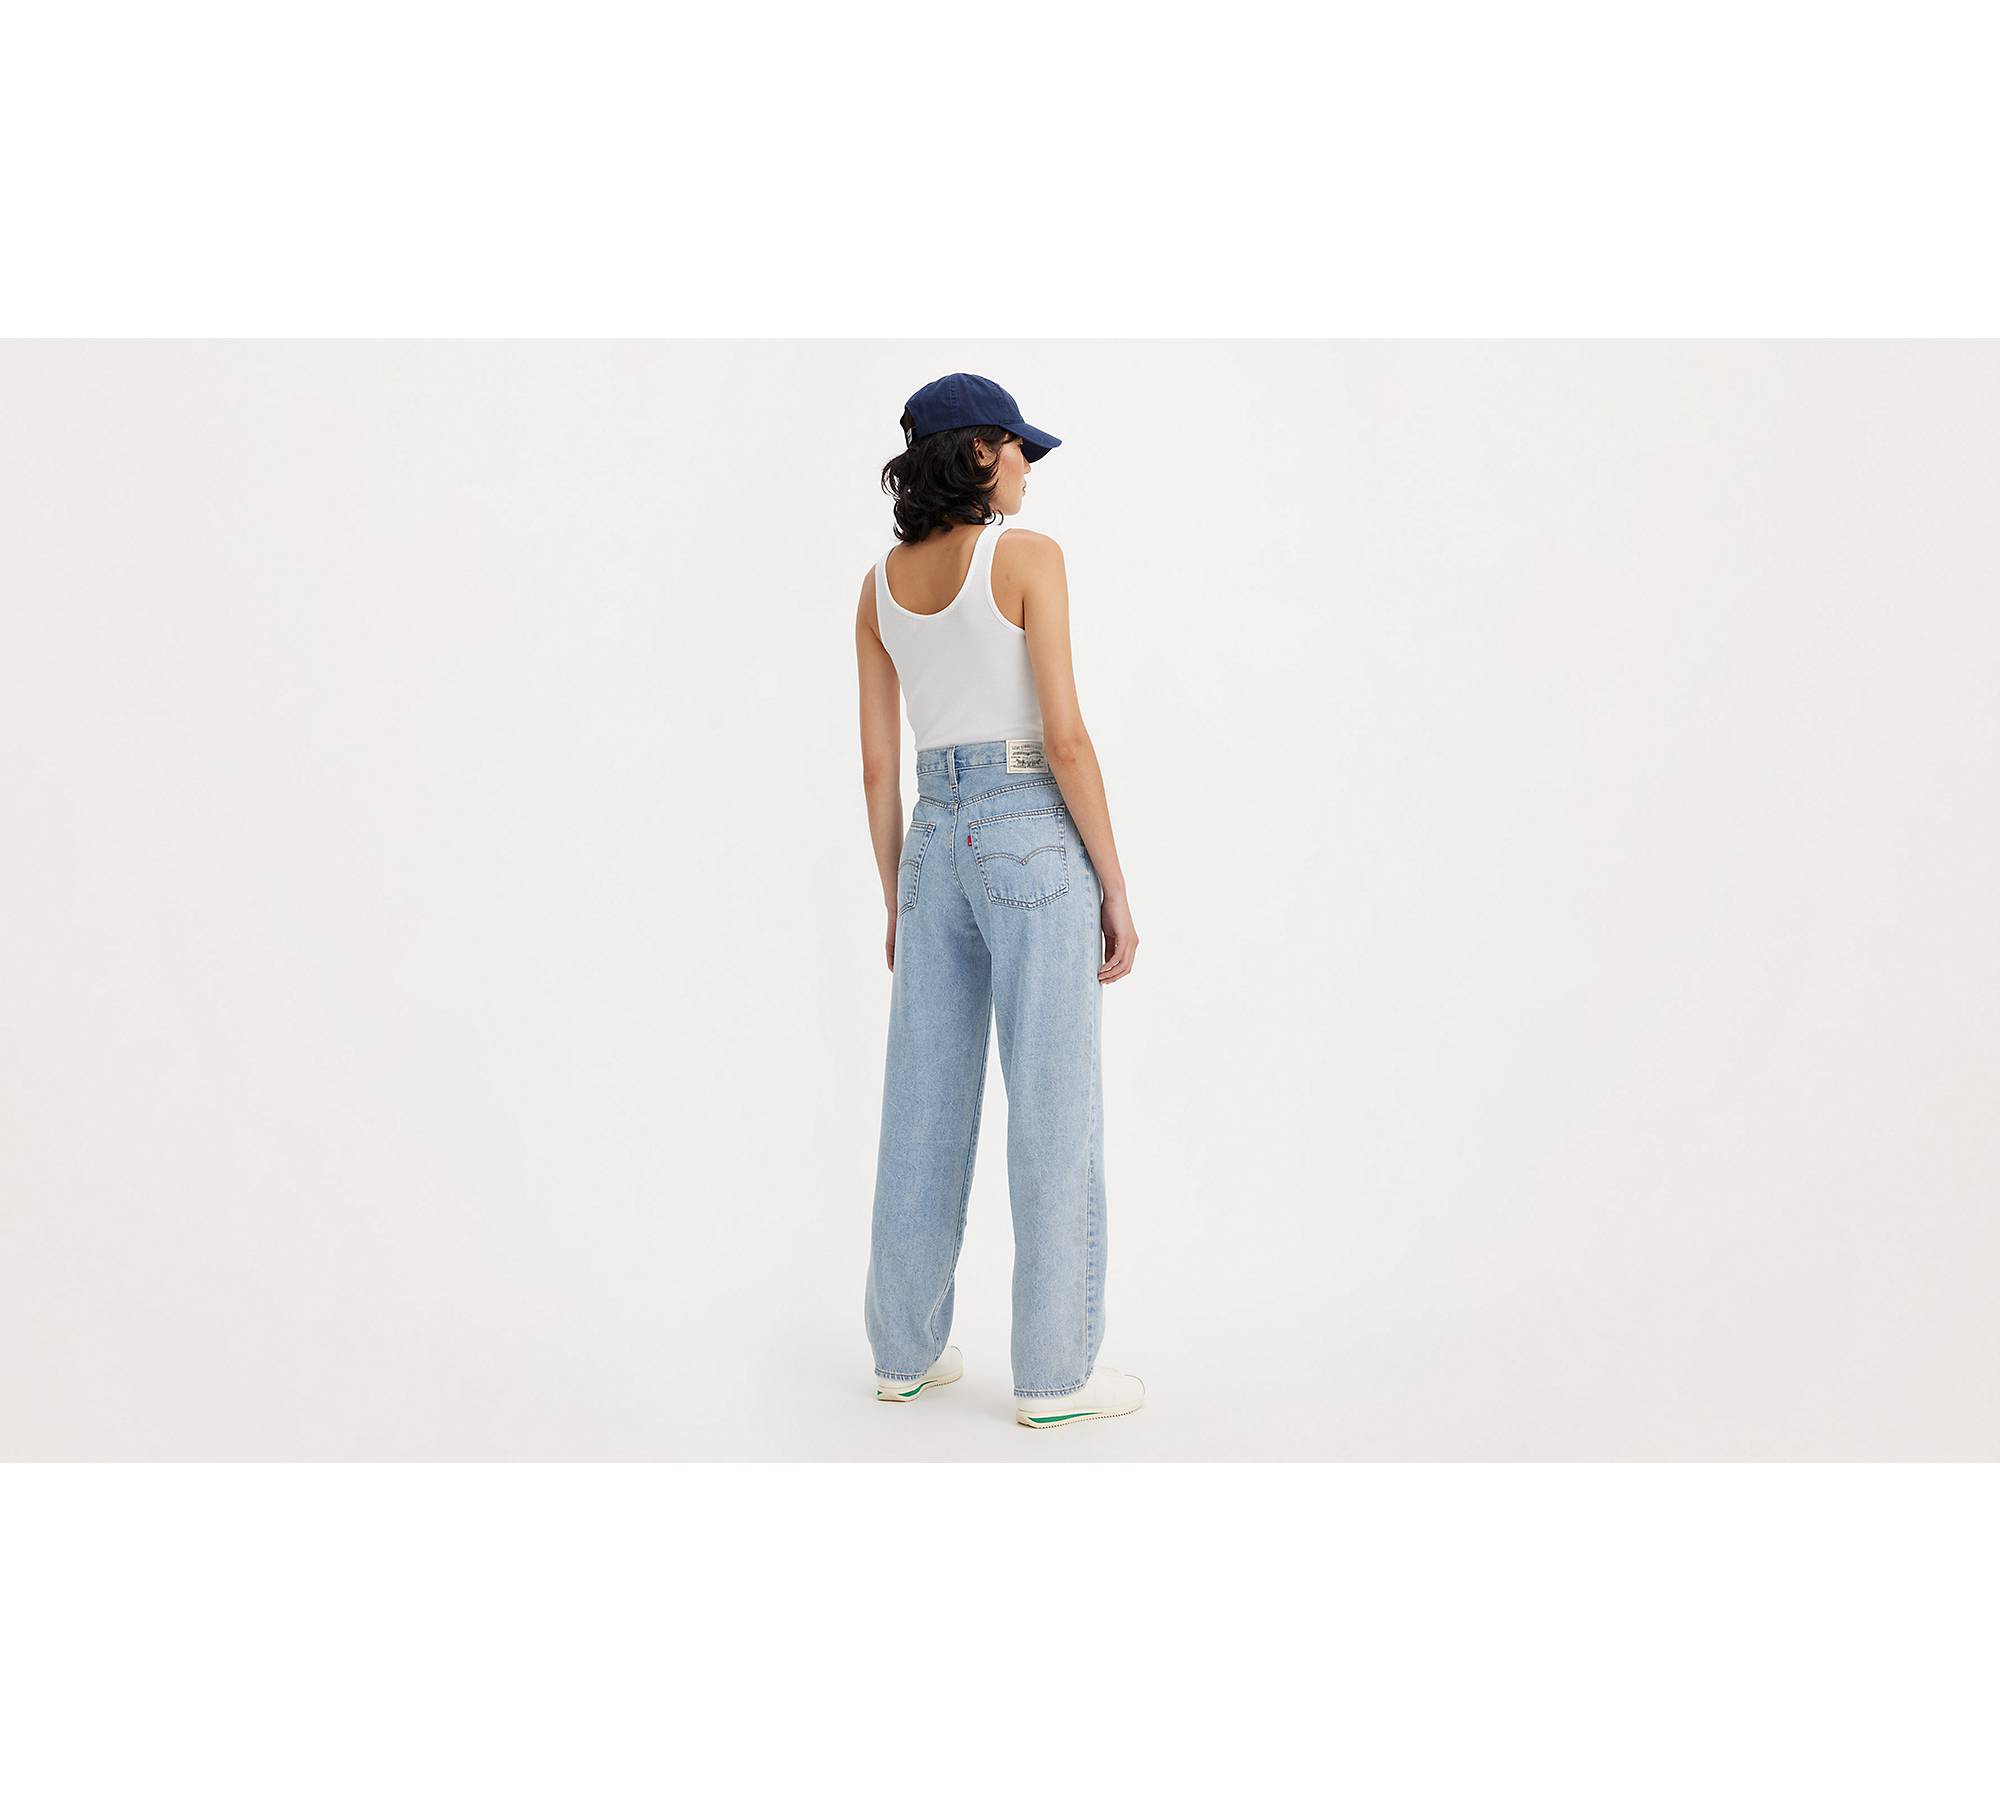 Baggy Dad Performance Cool Women's Jeans - Light Wash | Levi's® US